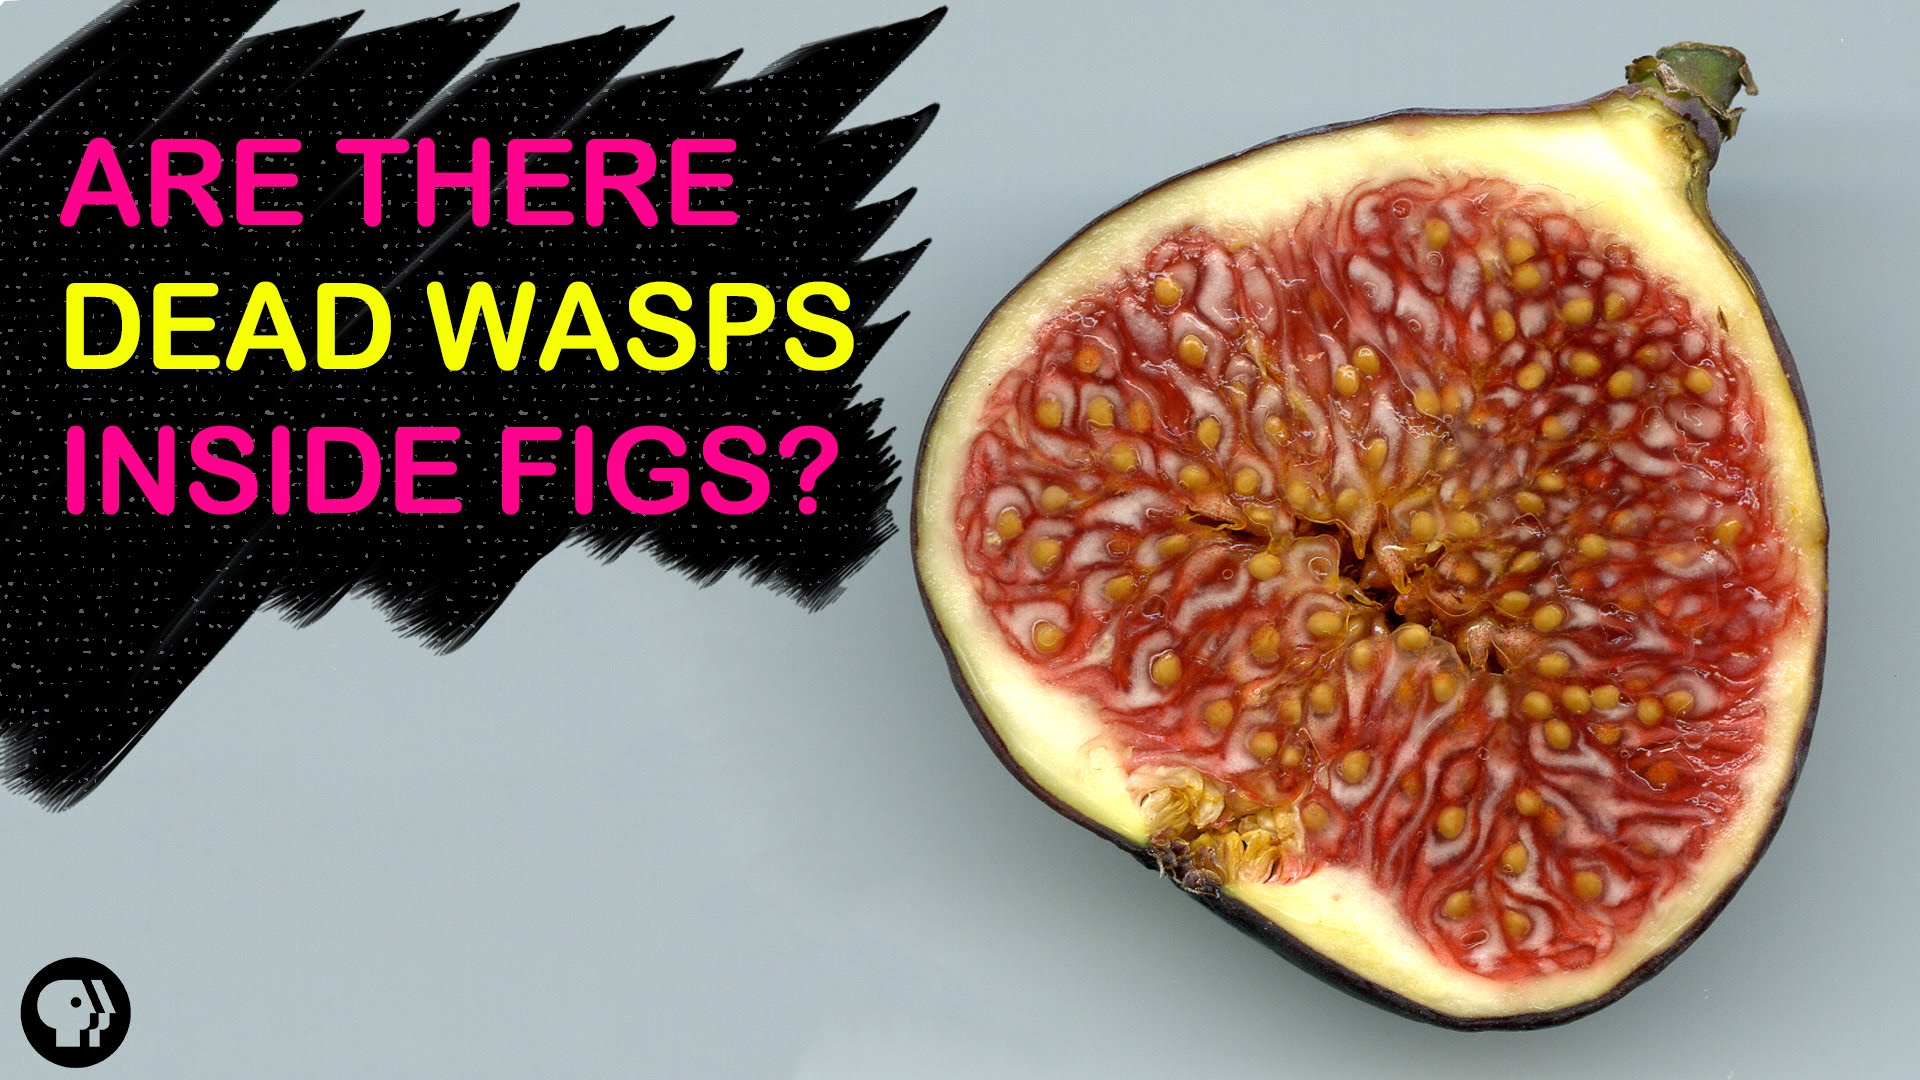 Are There Dead Wasps In Figs? | Gross Science - YouTube